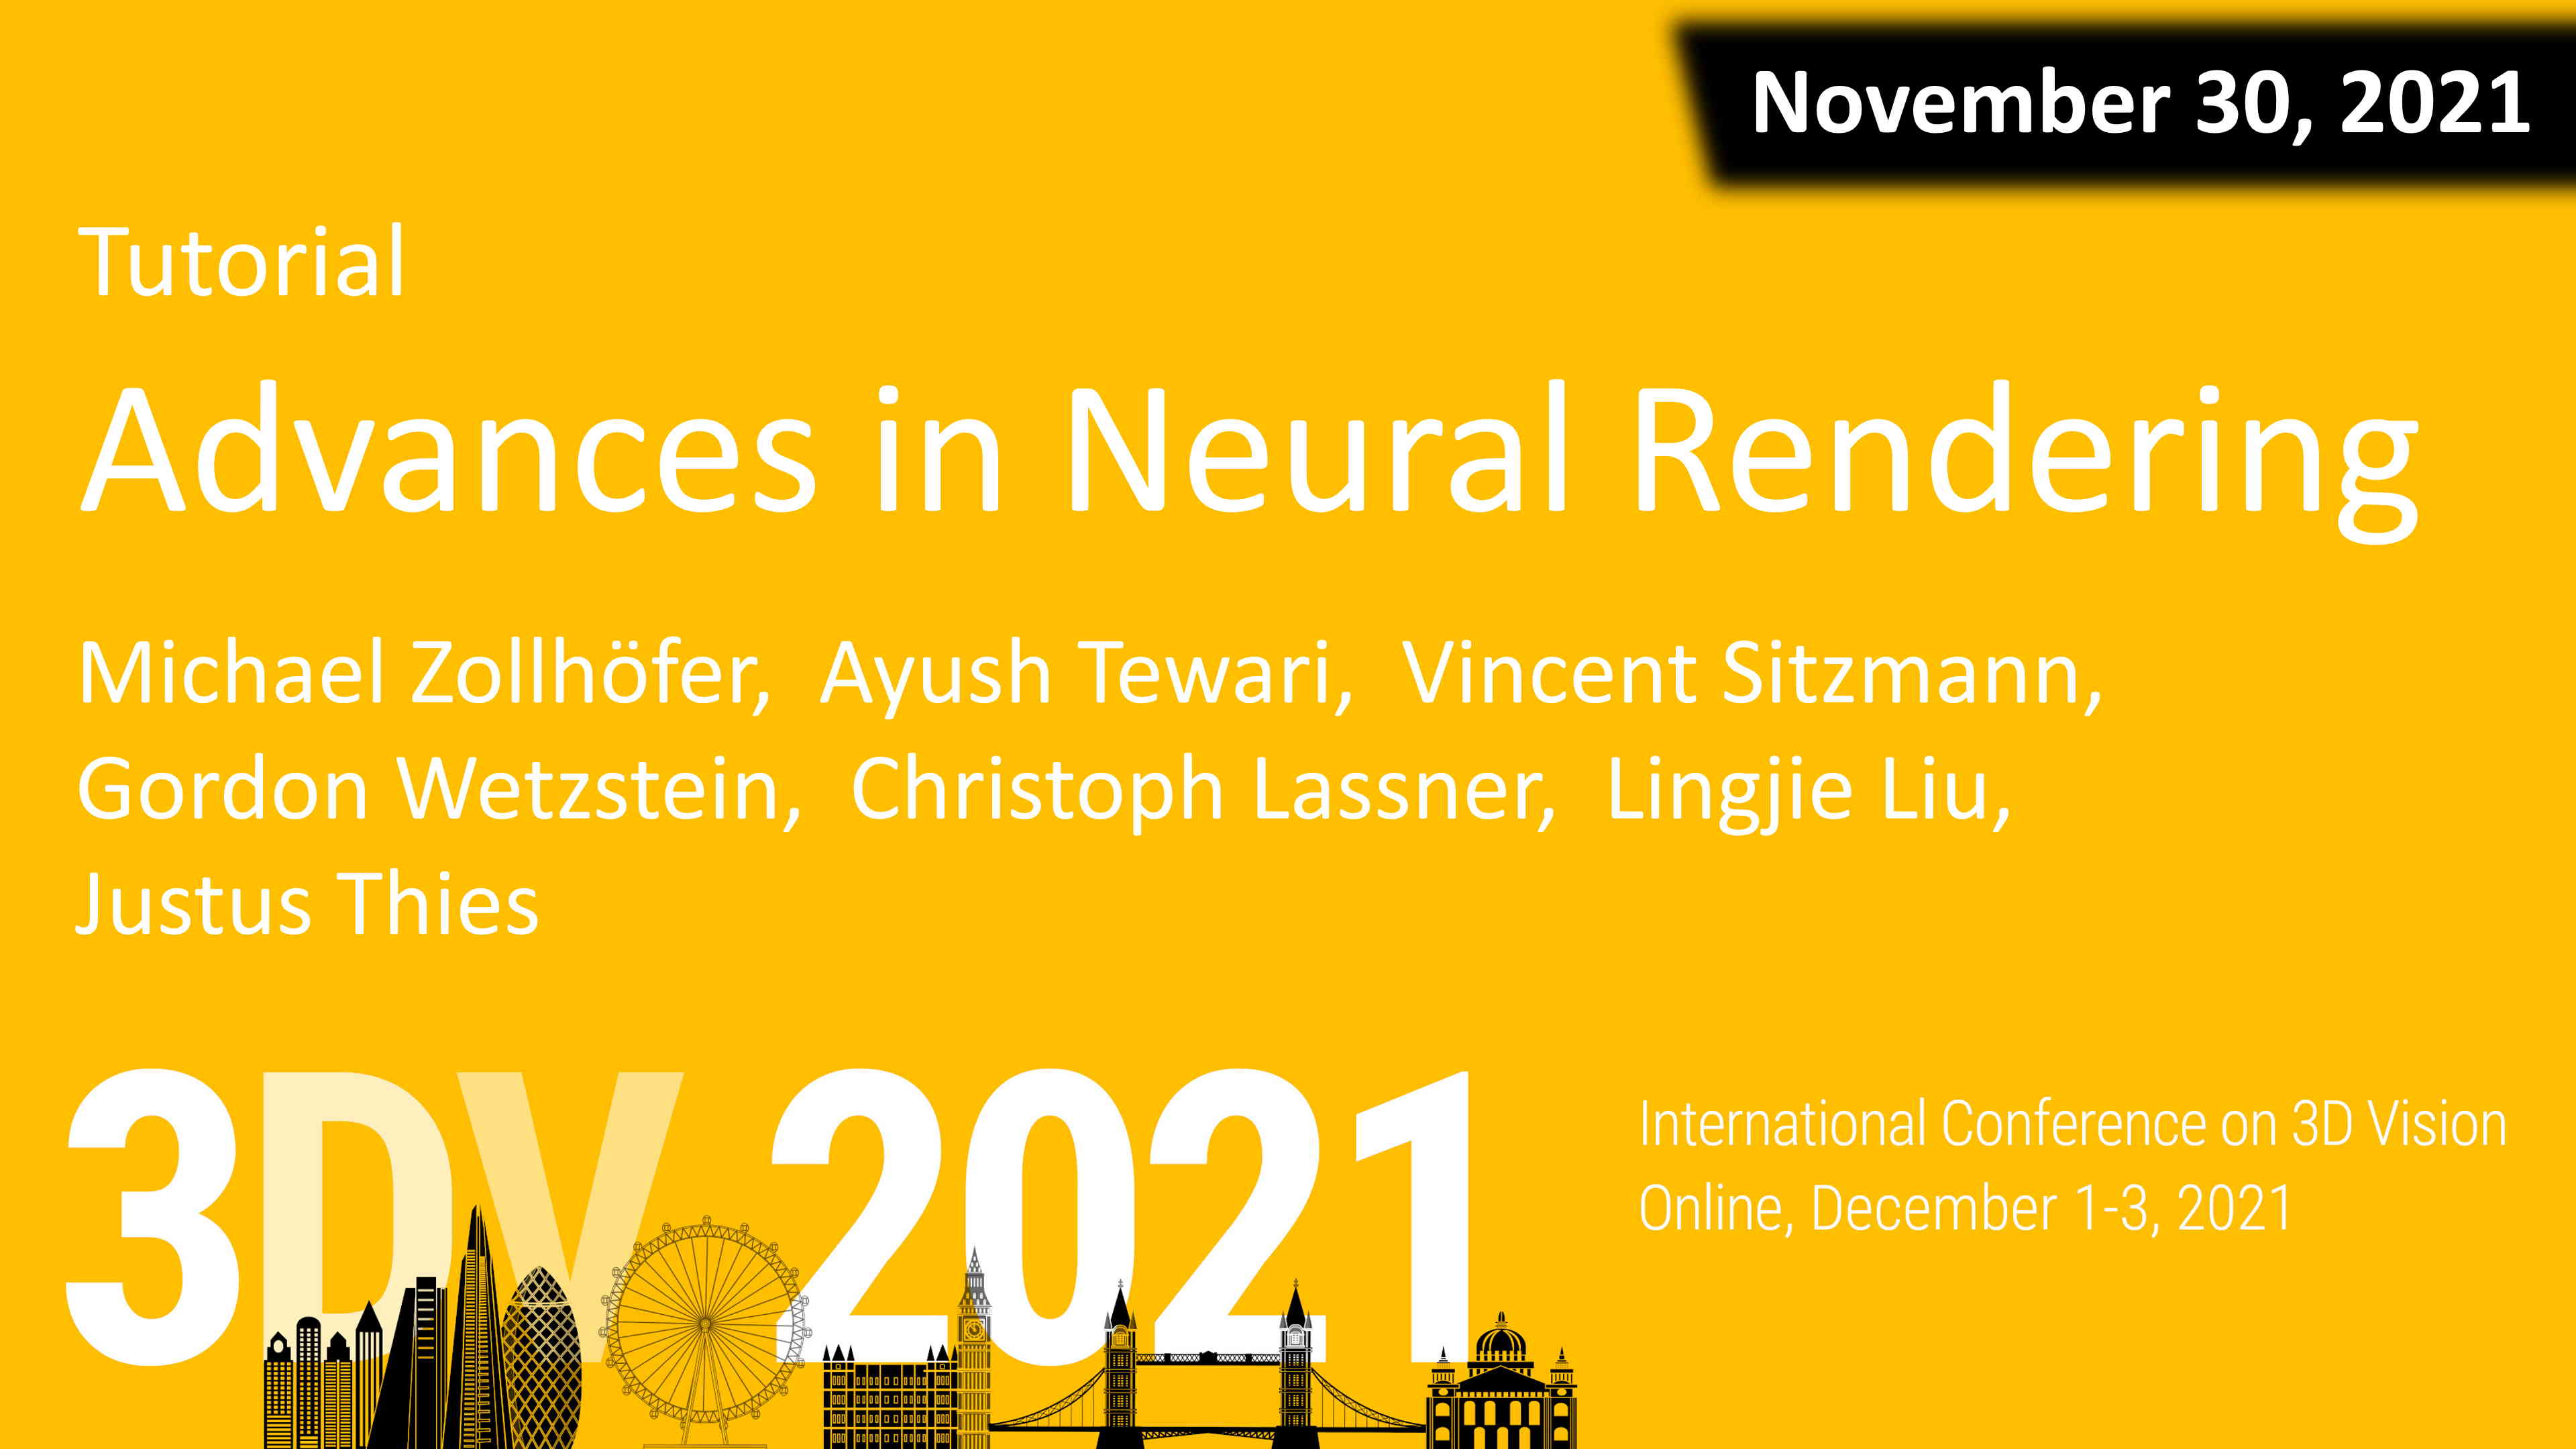 3DV 2021 - Tutorial on the Advances in Neural Rendering